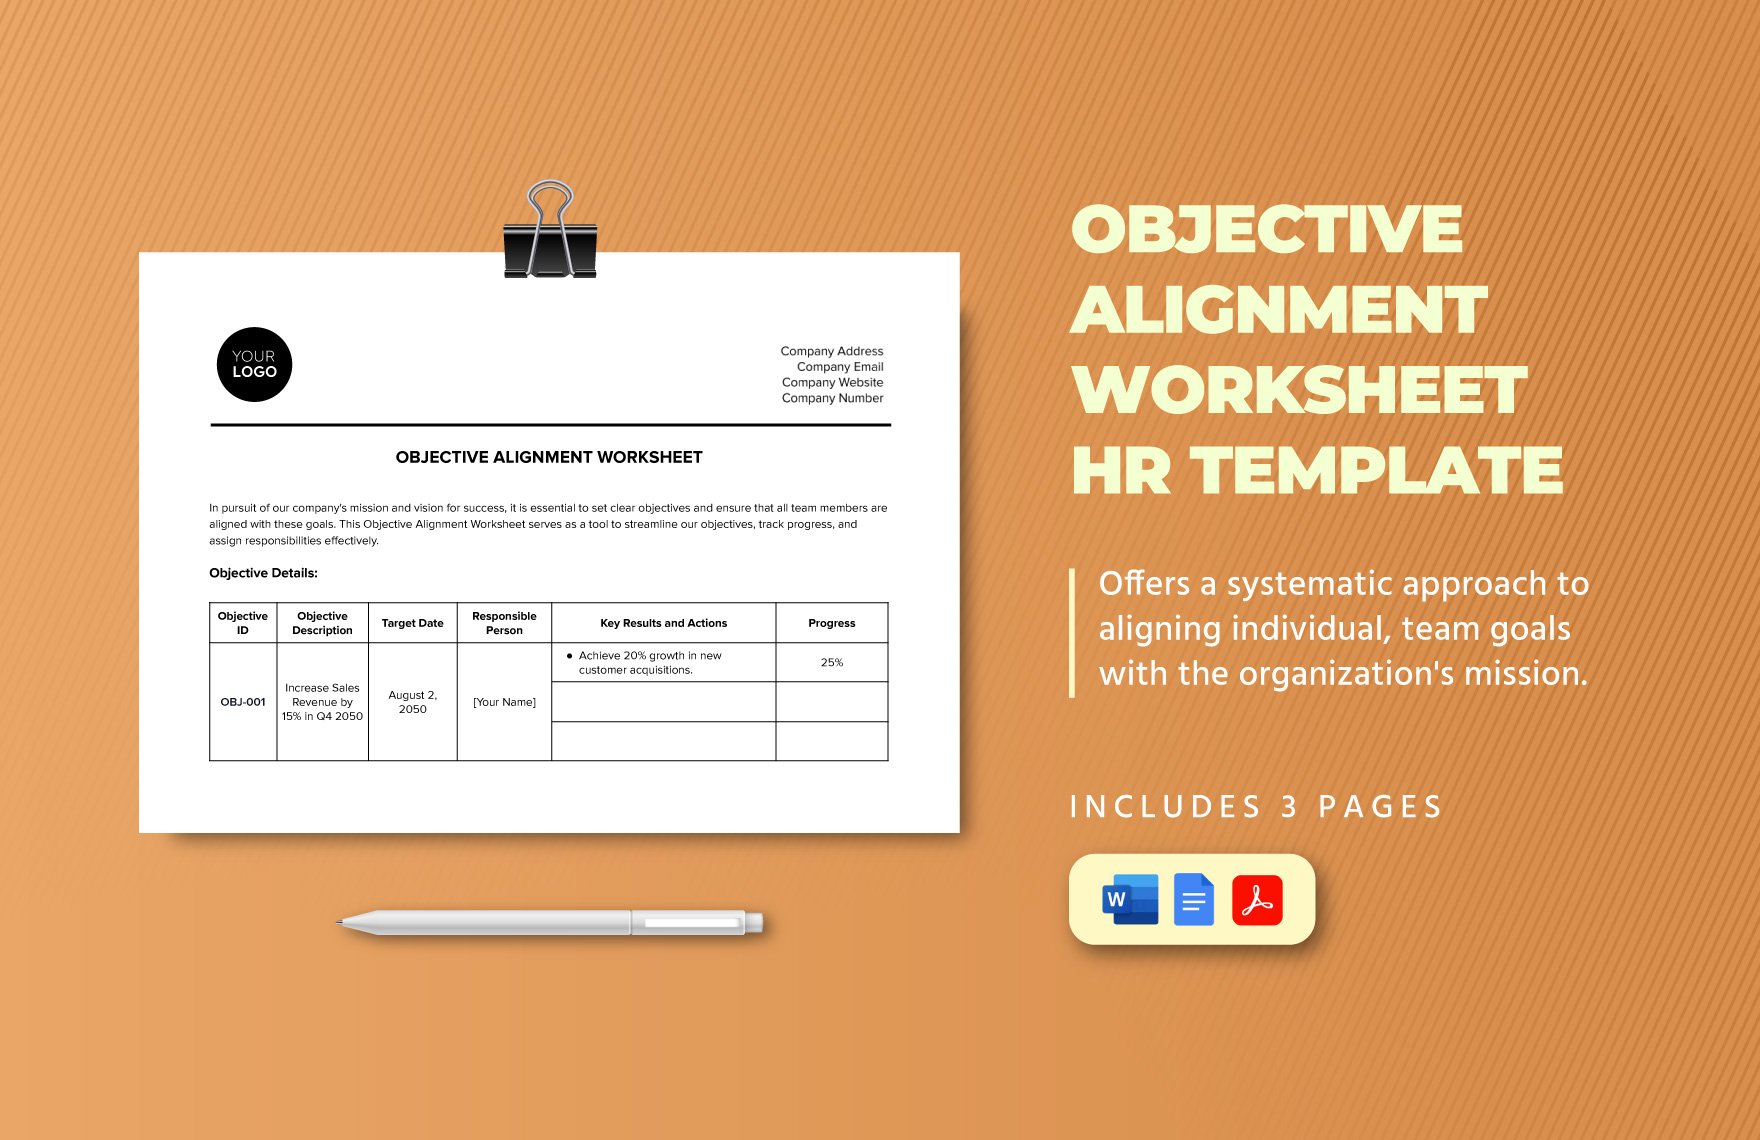 Objective Alignment Worksheet HR Template in Word, Google Docs, PDF